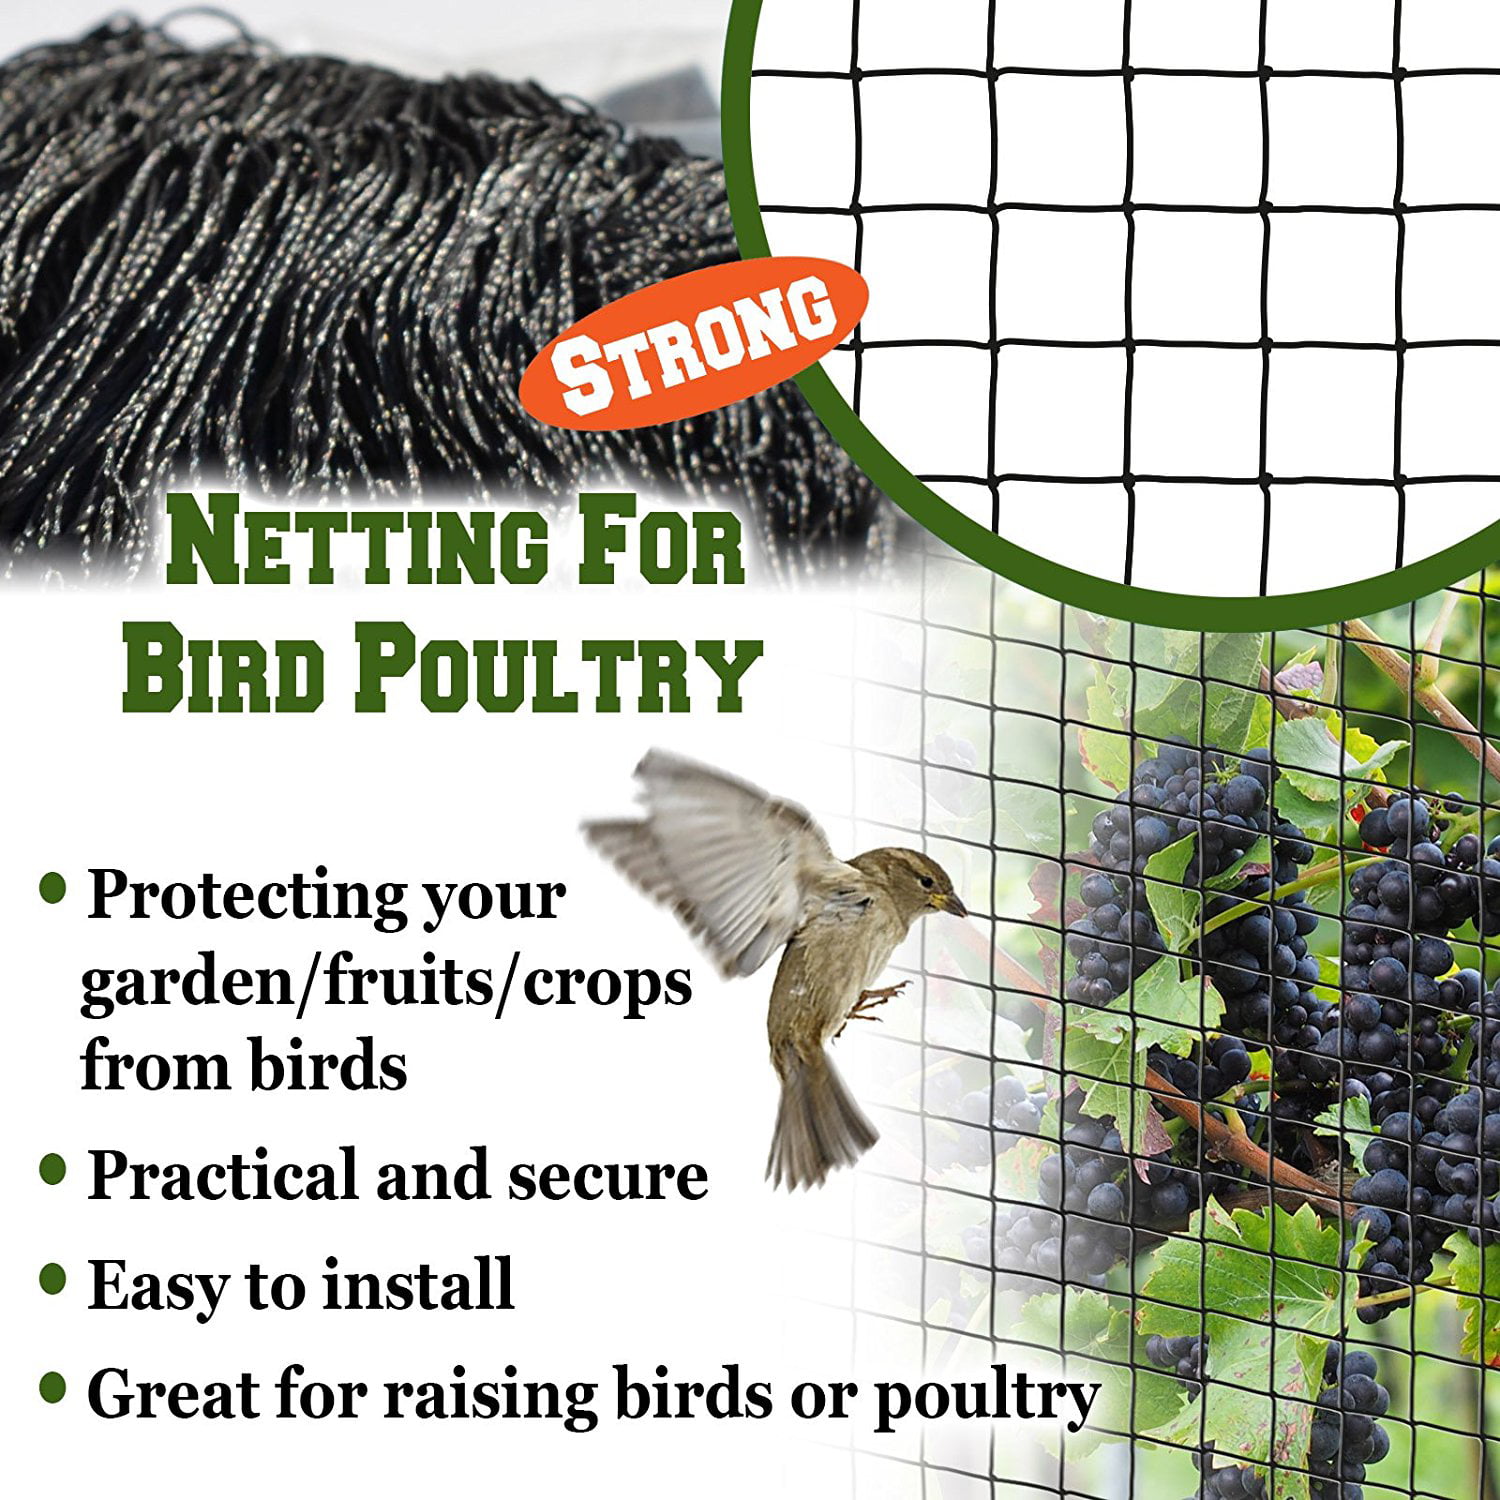 Bird Netting Zhucha Garden Netting Poultry Netting Protect Plants and Fruit Trees Deer and Other Pests Poultry Lasting Against Birds Heavy Duty Pond Aviary Net 